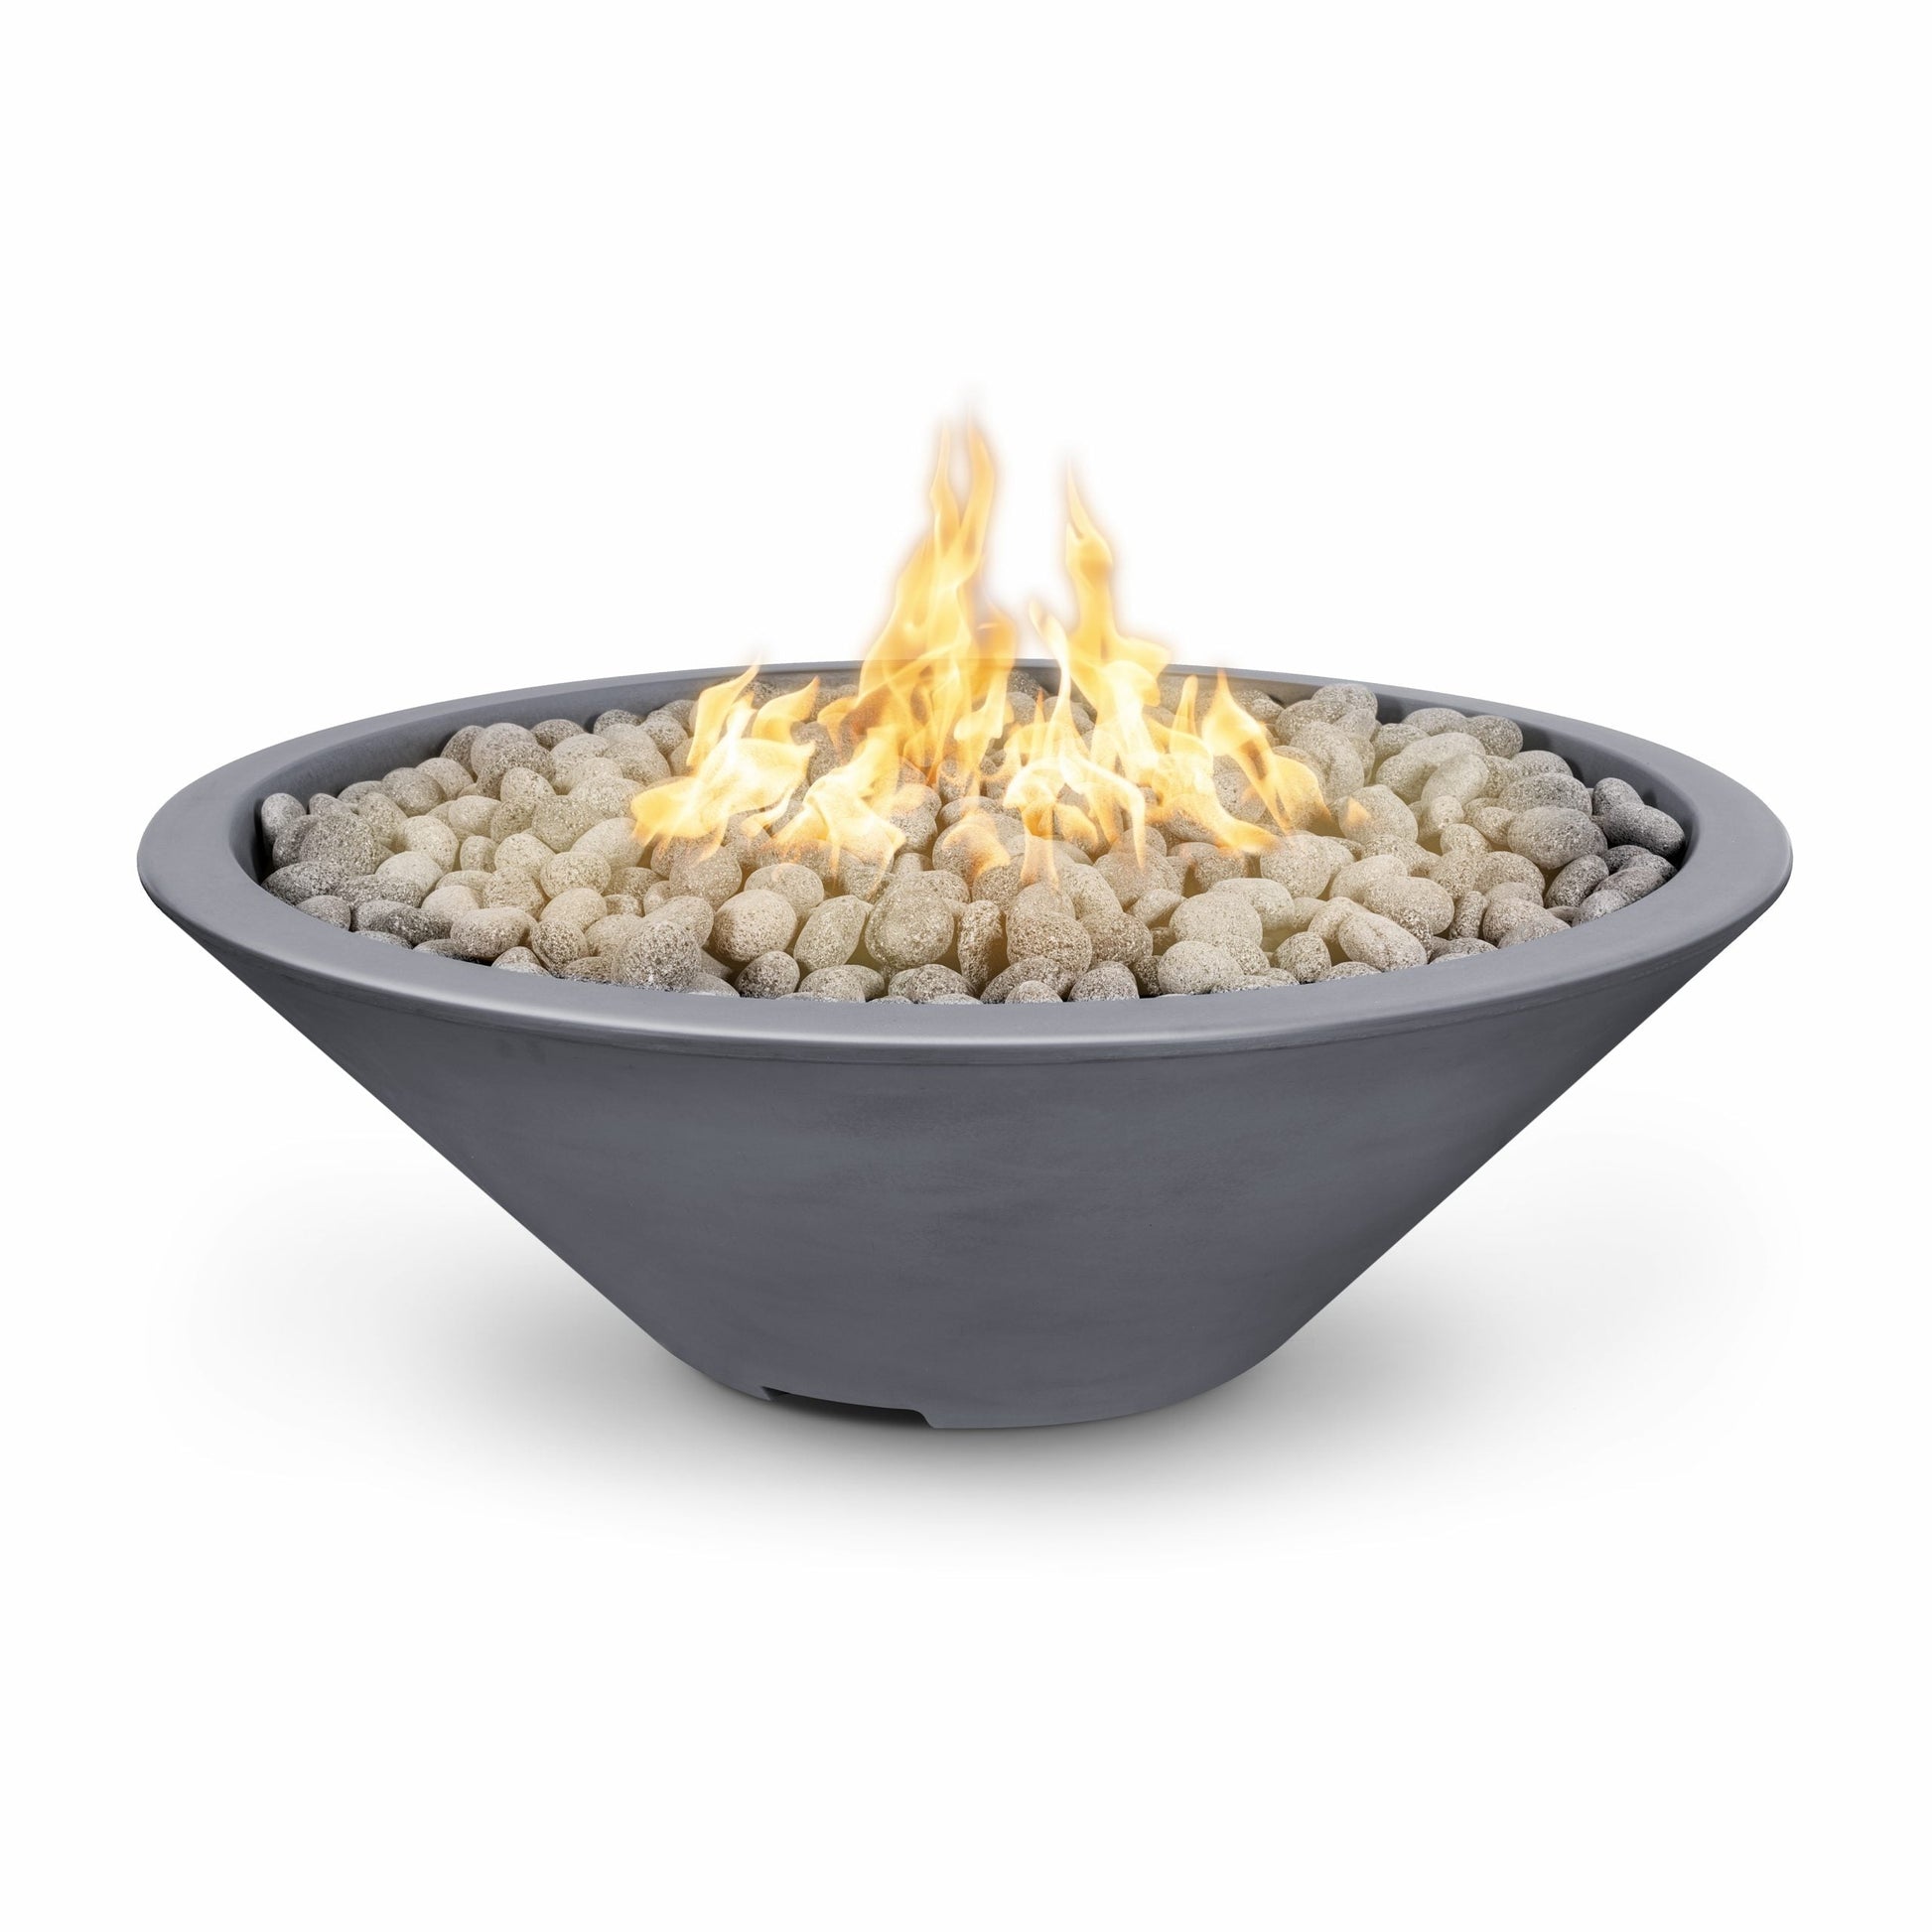 The Outdoor Plus Round Cazo 60" Java Powder Coated Metal Natural Gas Fire Pit with Match Lit with Flame Sense Ignition